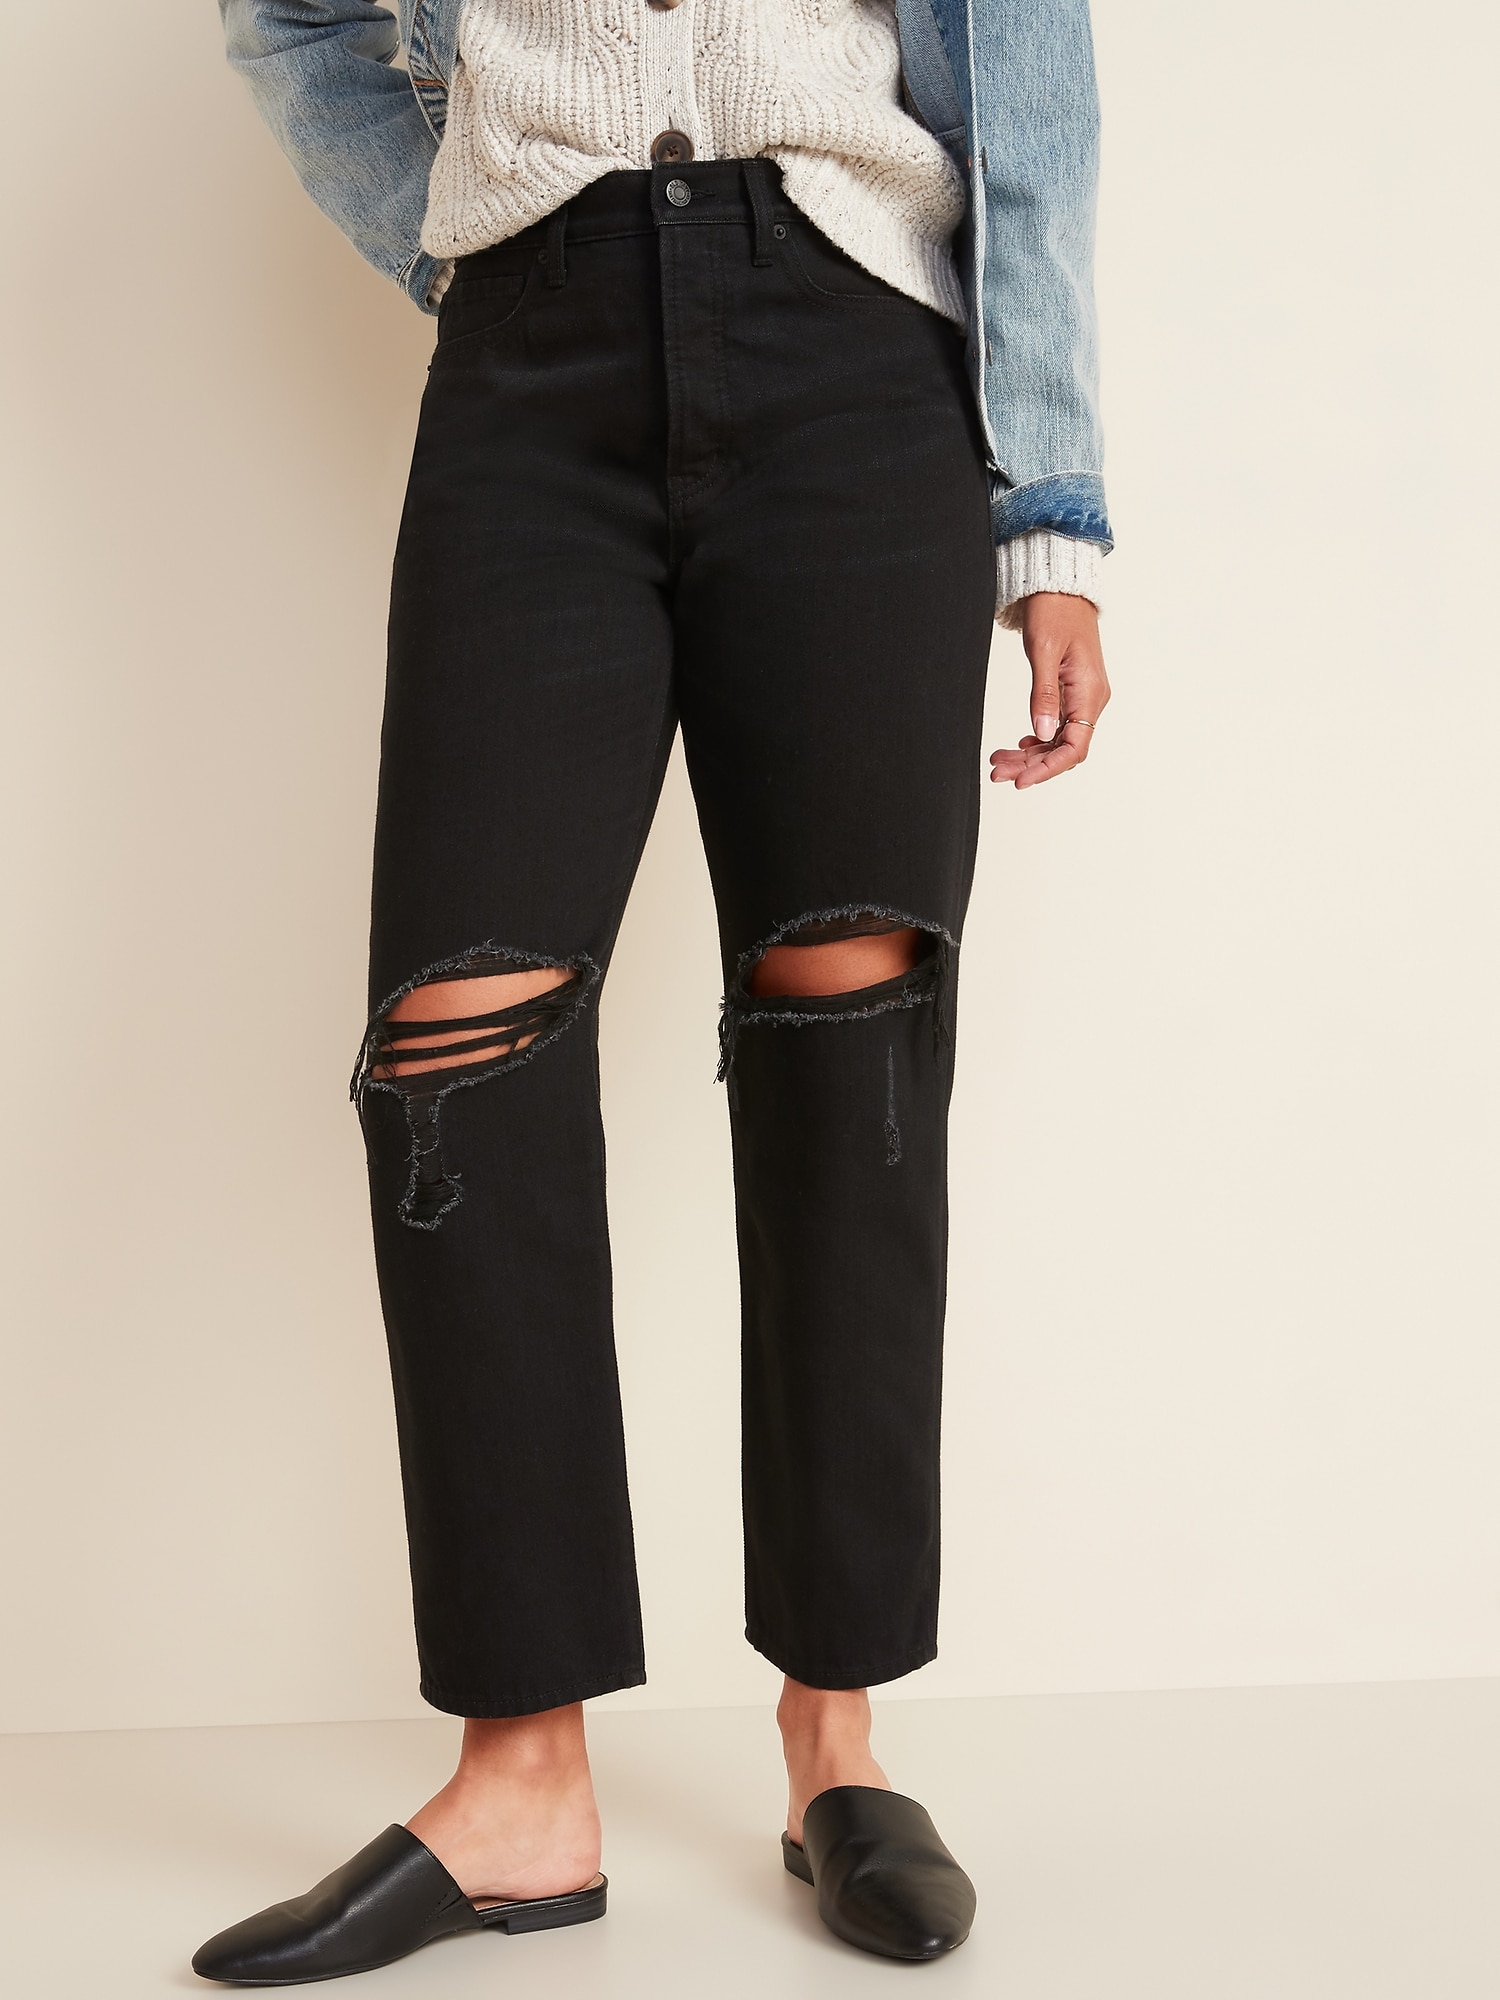 high waisted jeans button fly